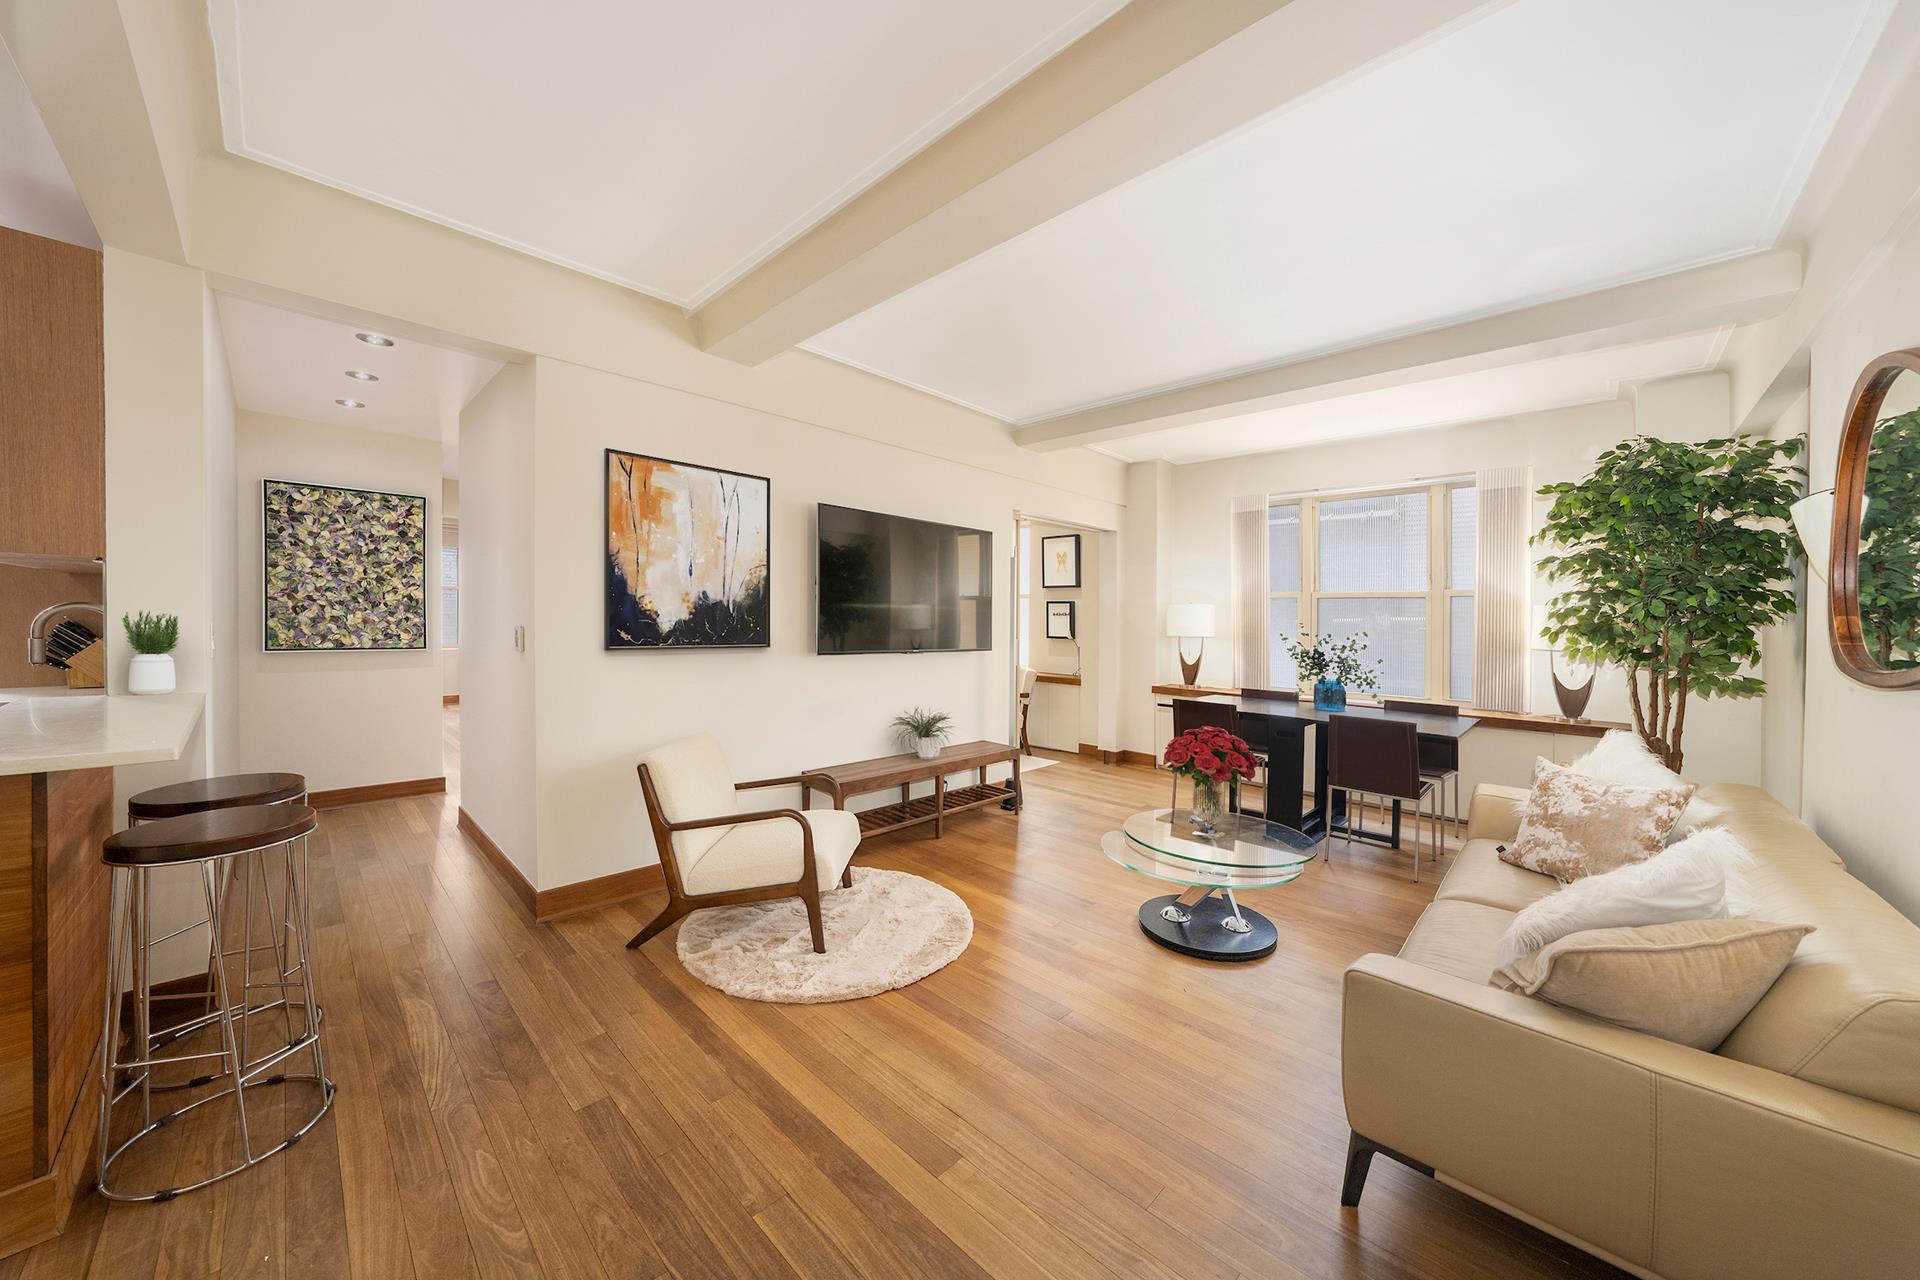 65 Central Park 2G, Lincoln Sq, Upper West Side, NYC - 2 Bedrooms  
2 Bathrooms  
5 Rooms - 